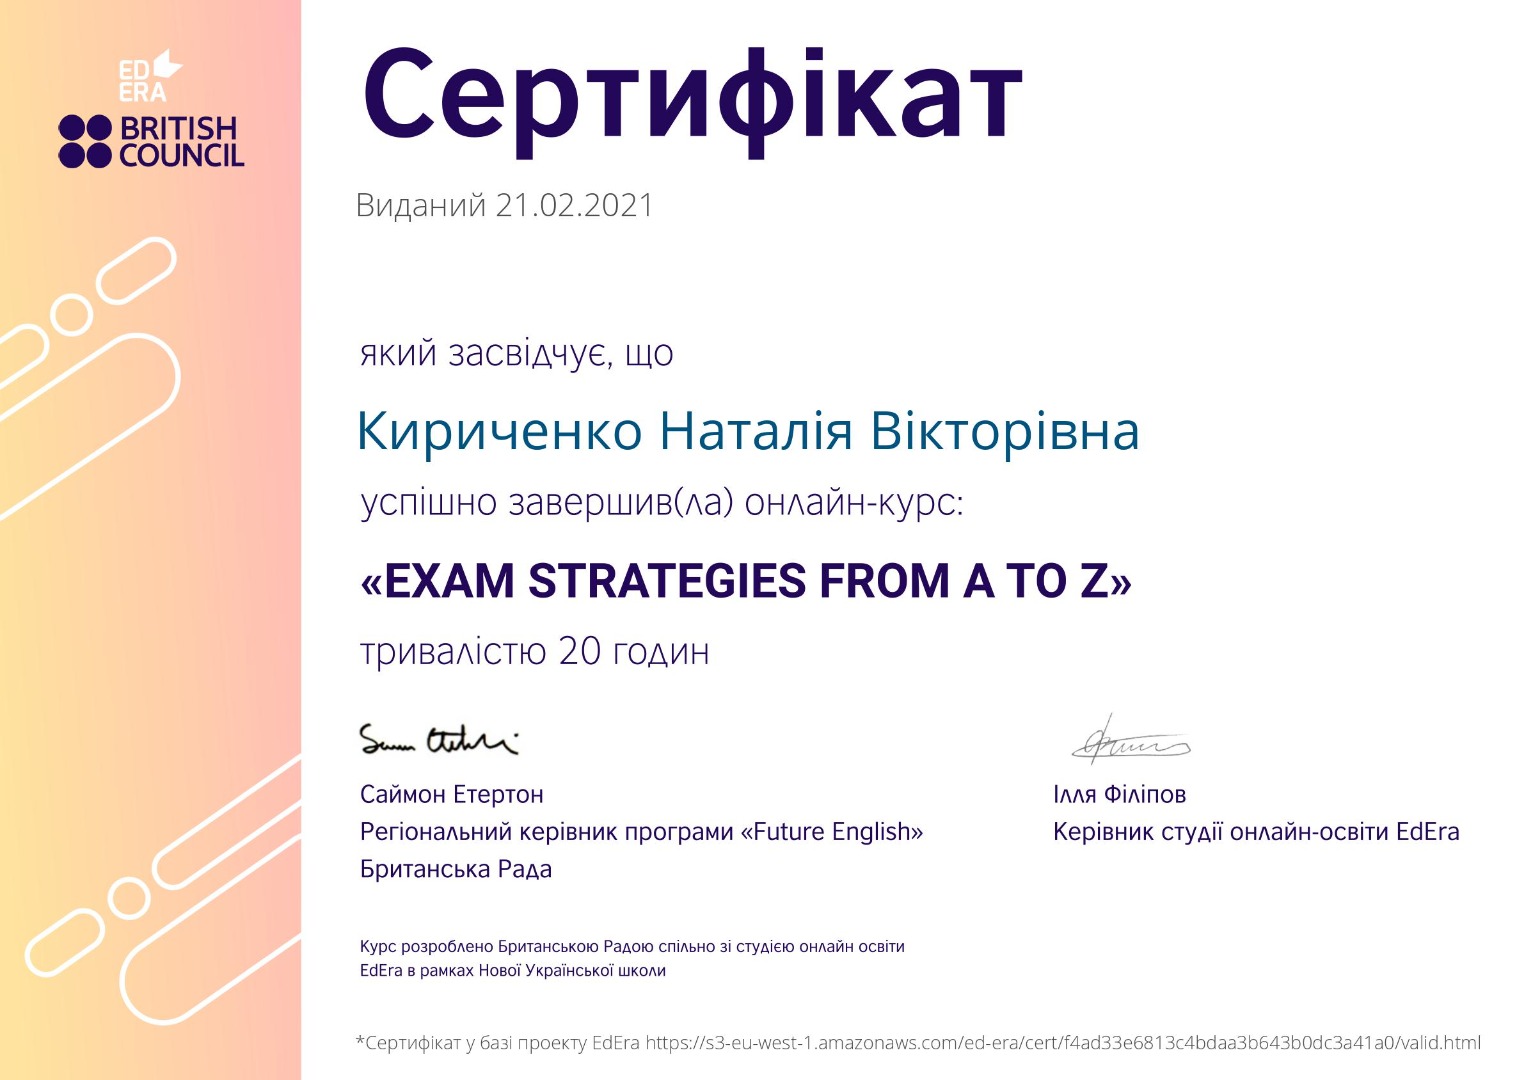 Exam strategies from A to Z